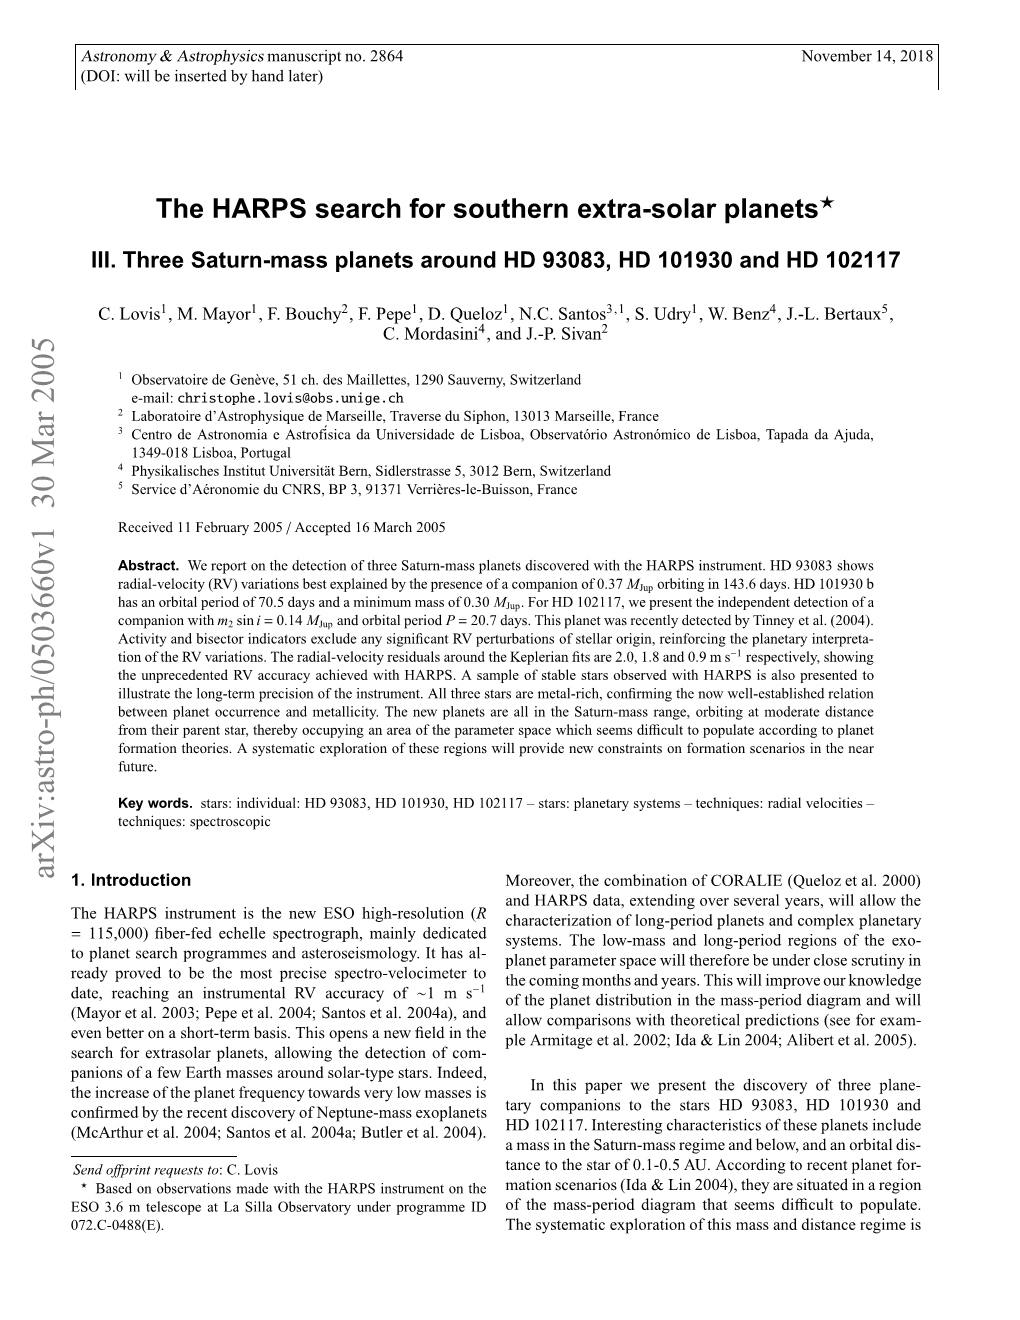 The HARPS Search for Southern Extra-Solar Planets. III. Three Saturn